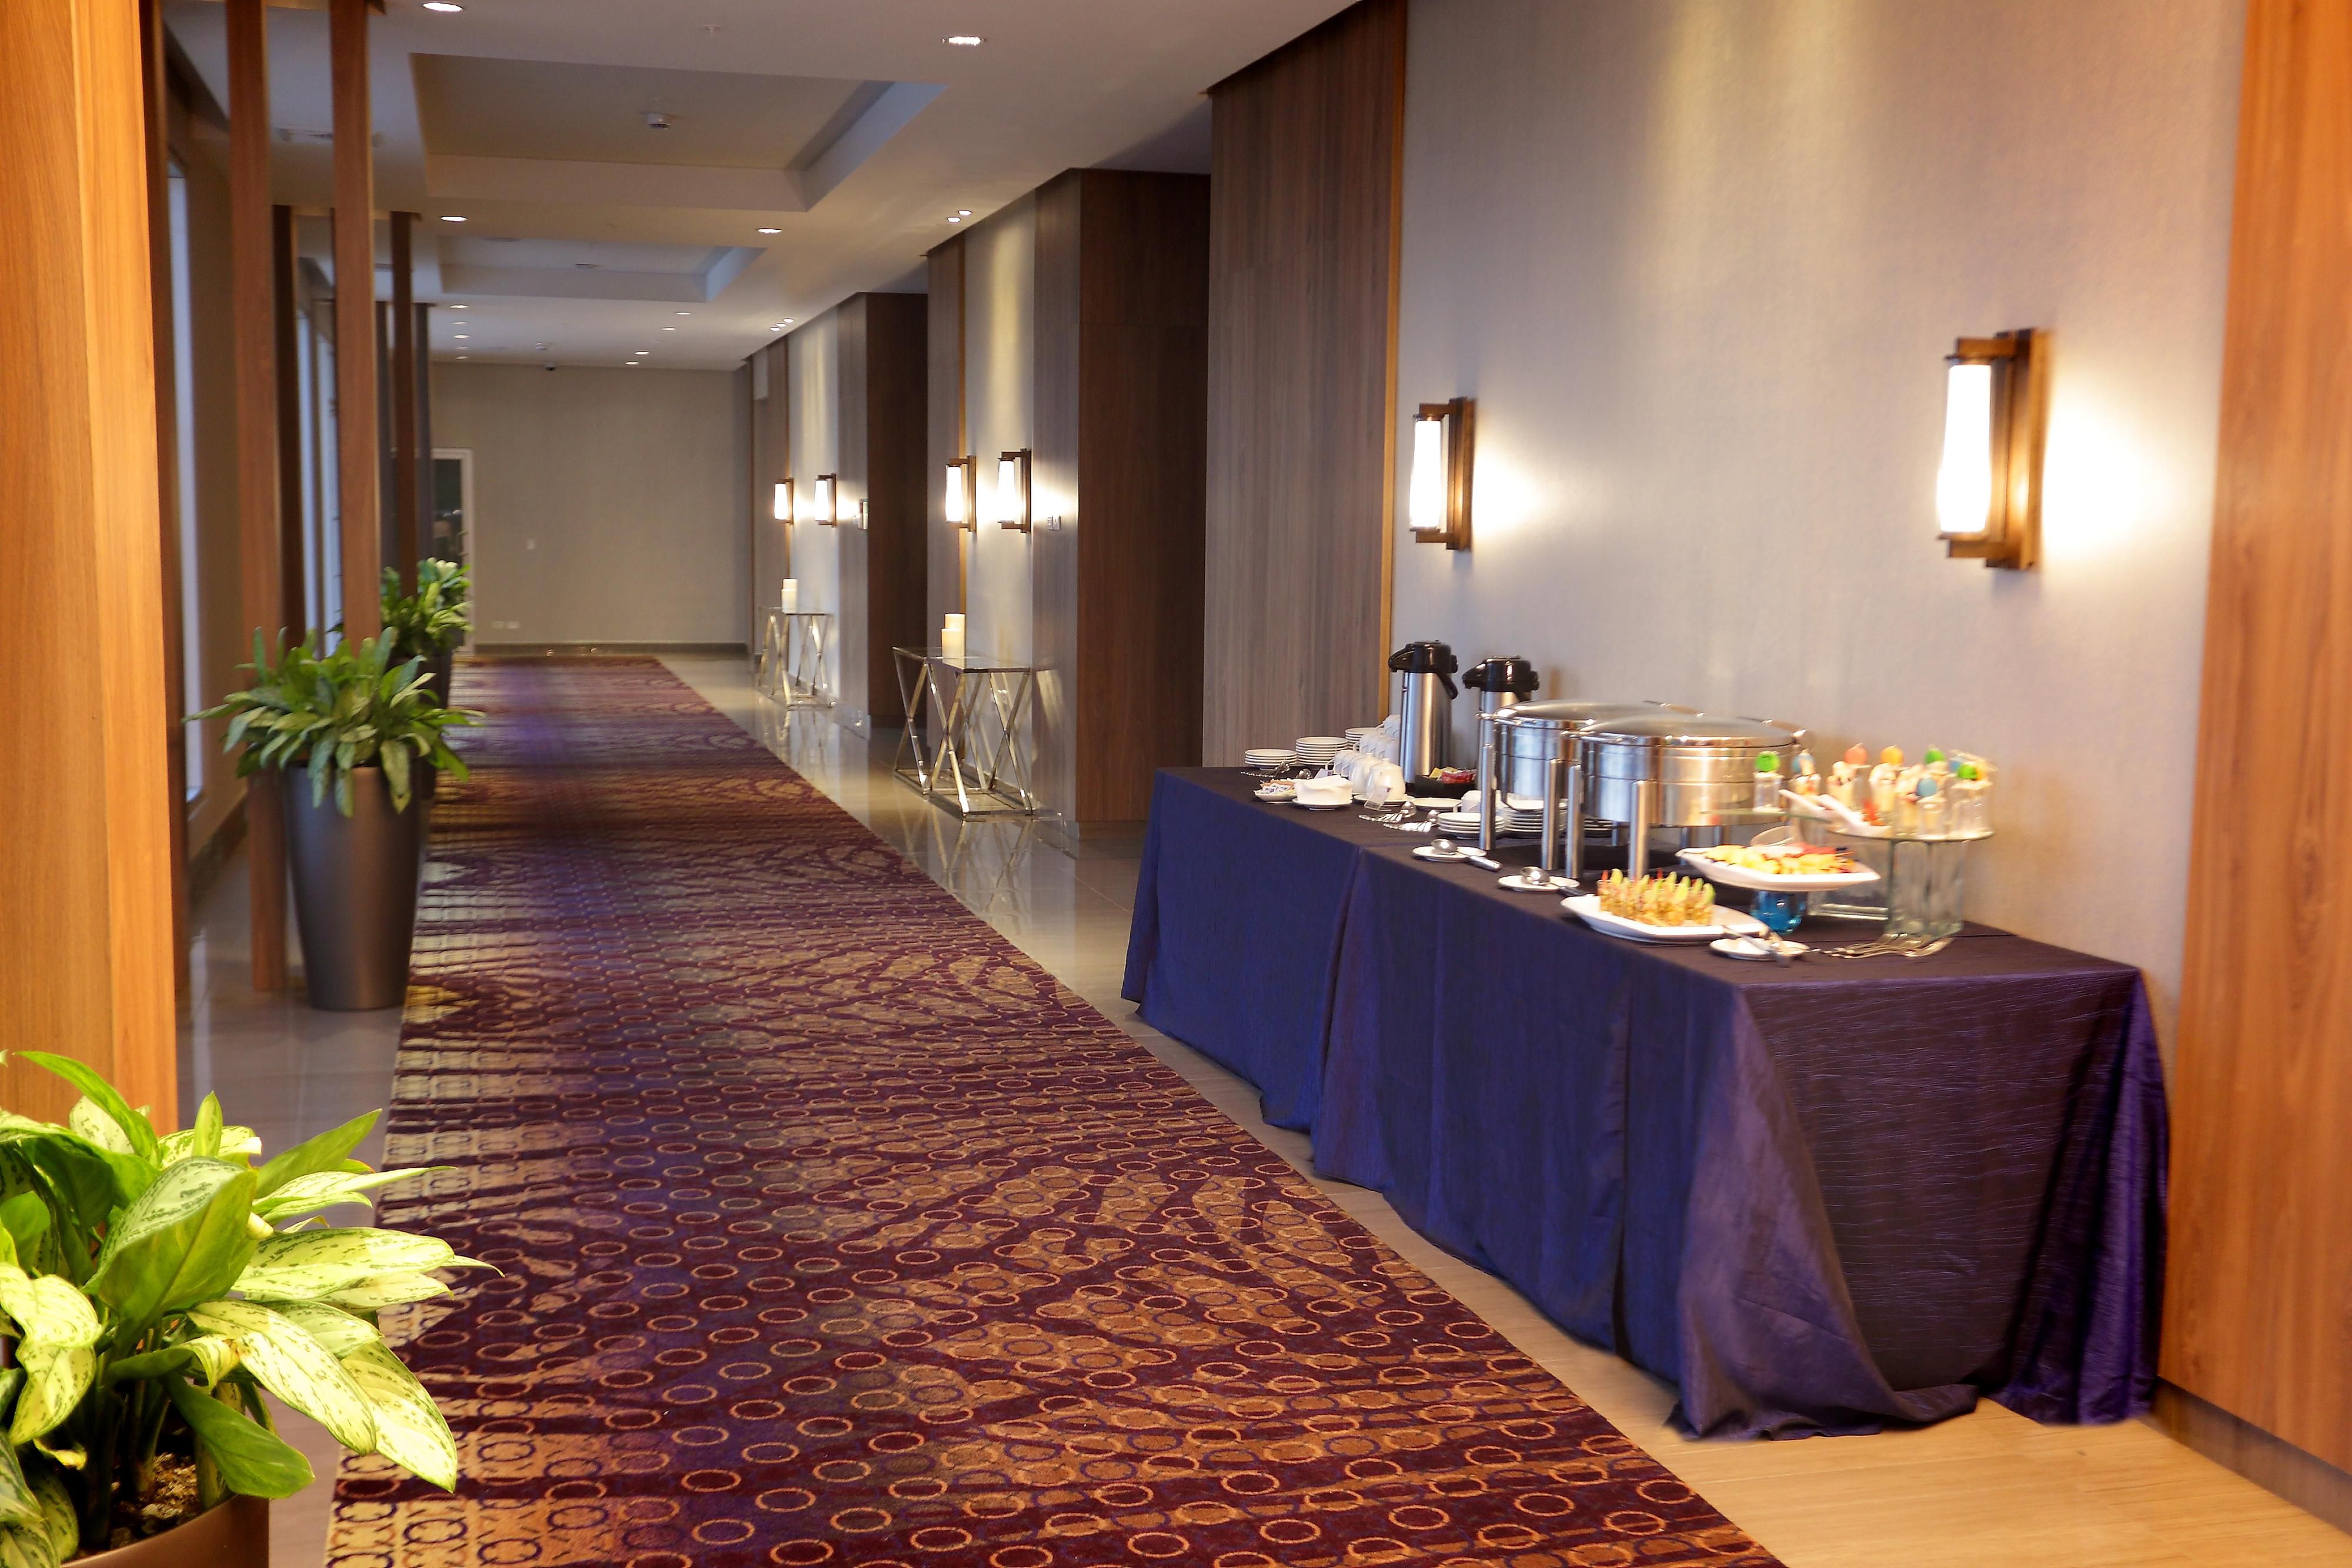 Pre-function Area at the Airport Hotel in Panama, Crowne Plaza PTY